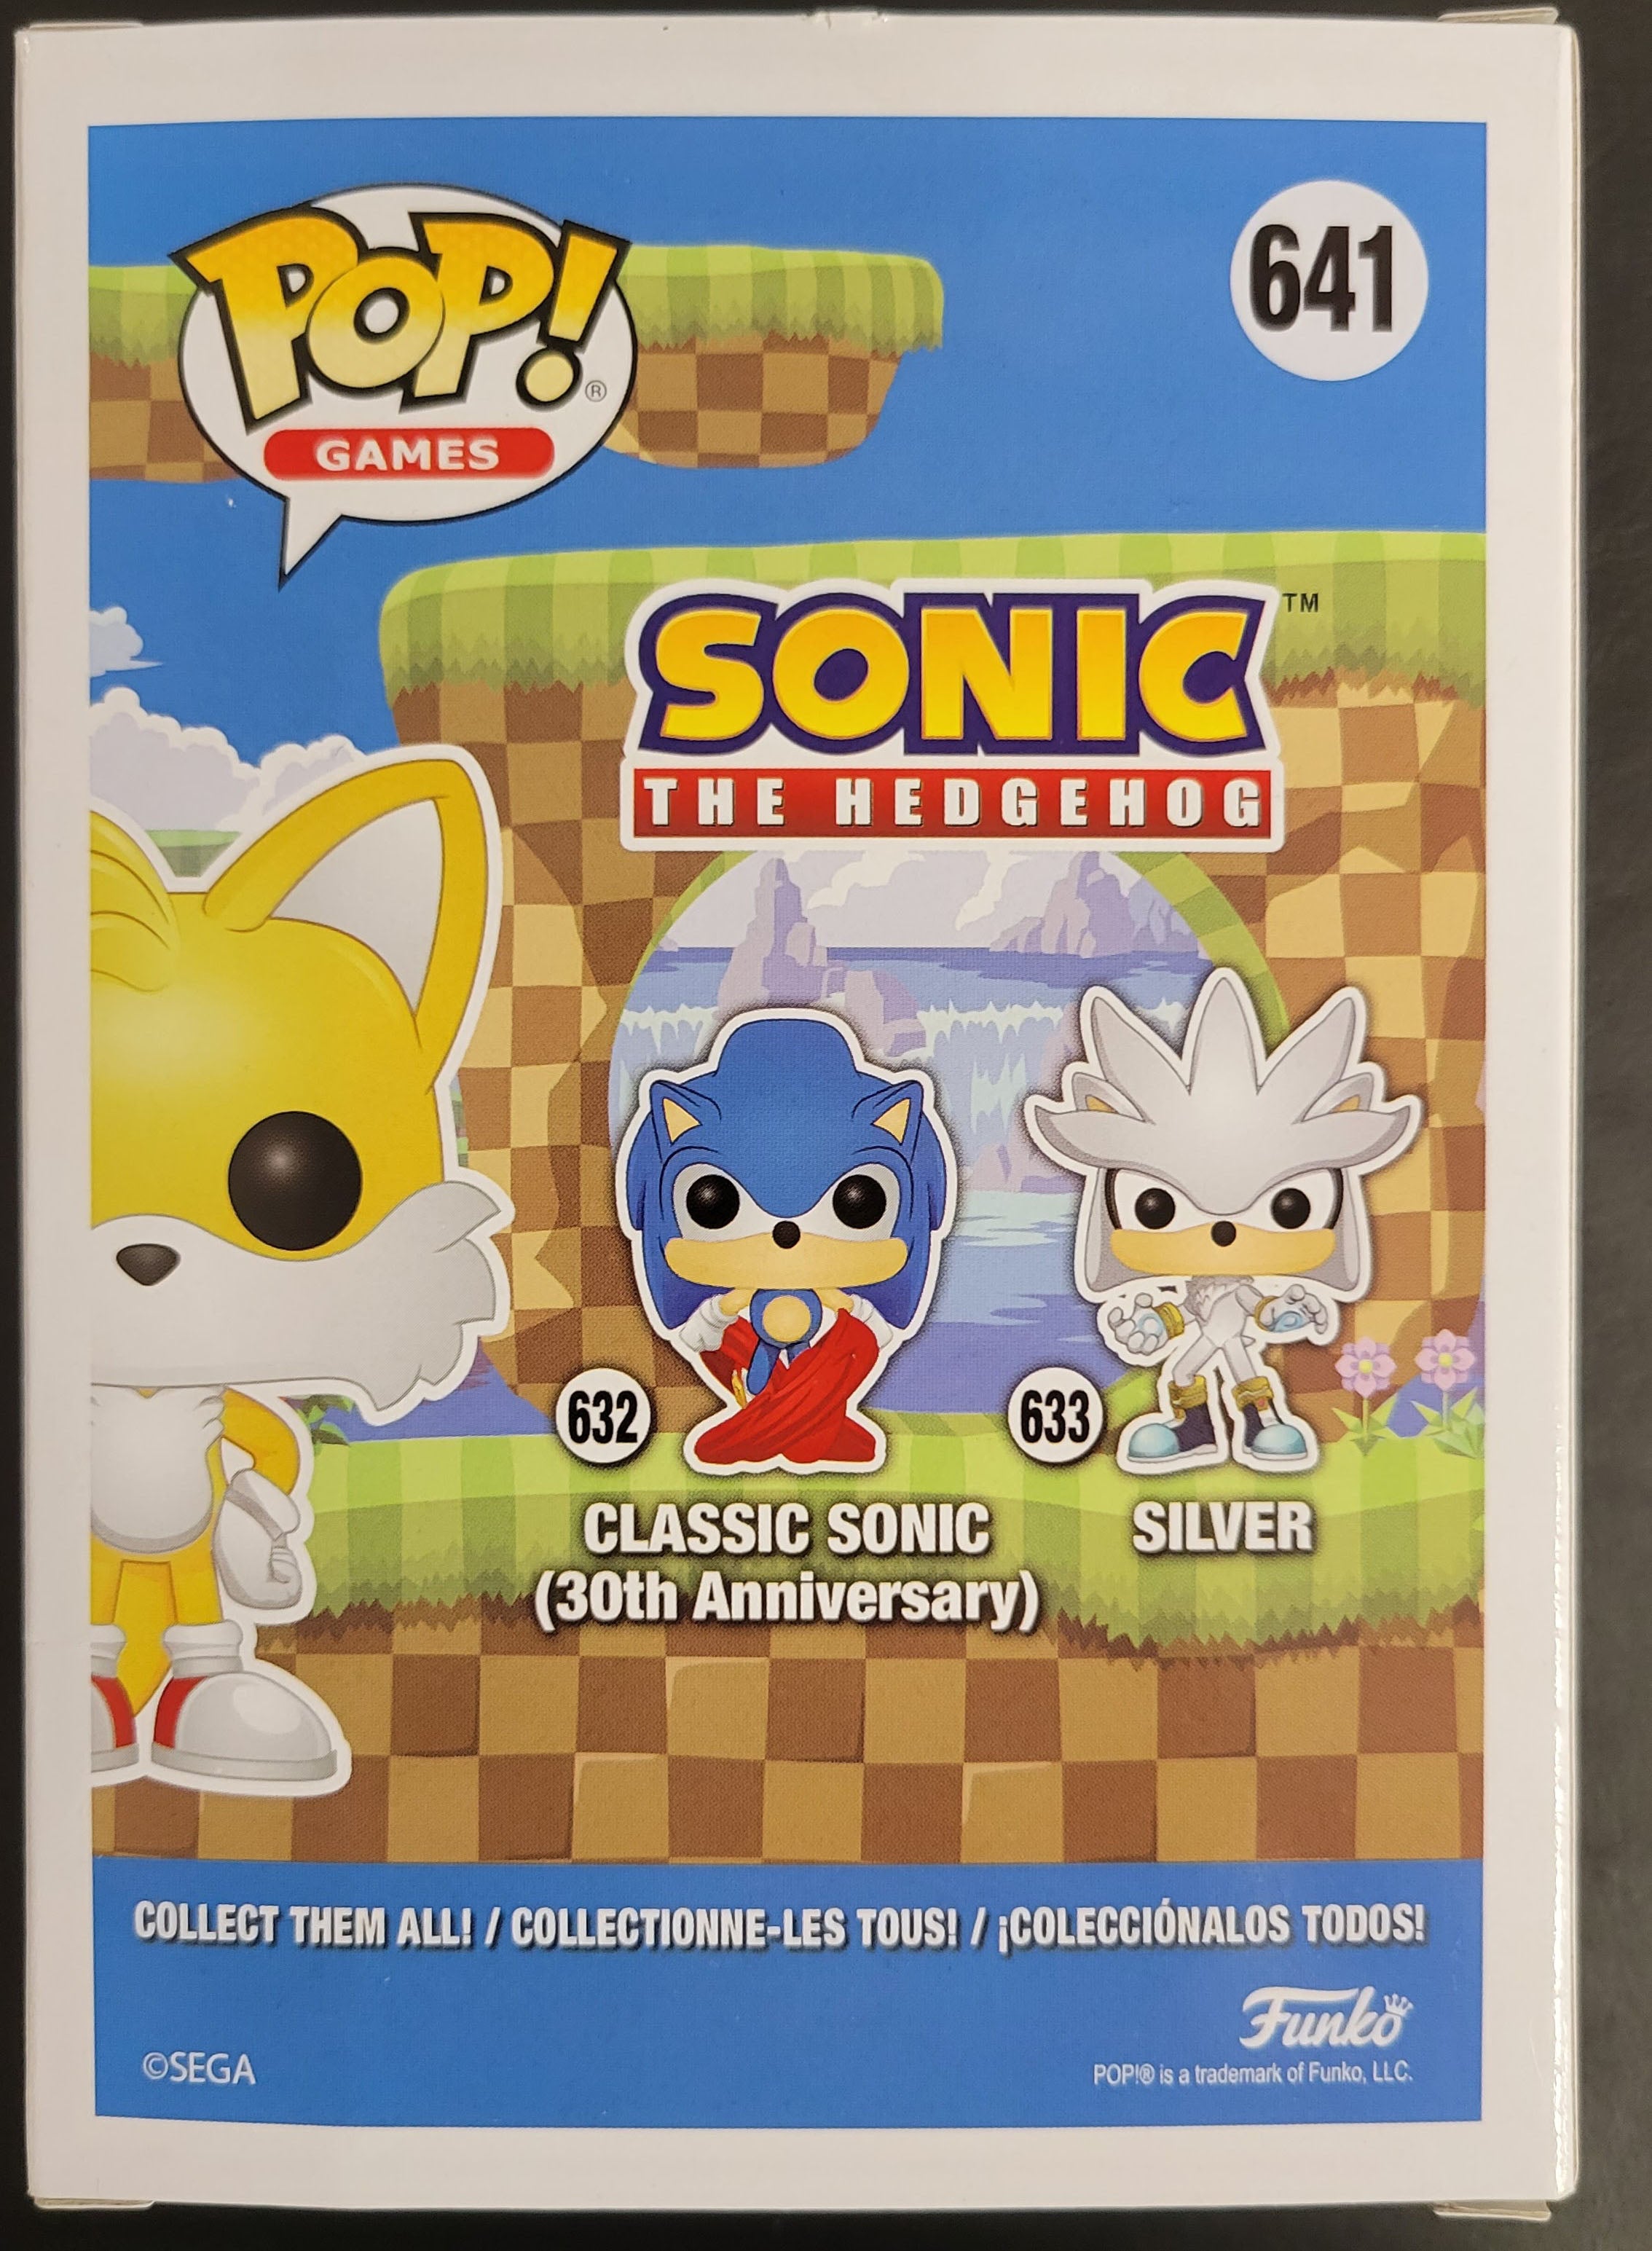 Tails Flocked Target Con Exclusive Autographed by Colleen O'Shaughnessey